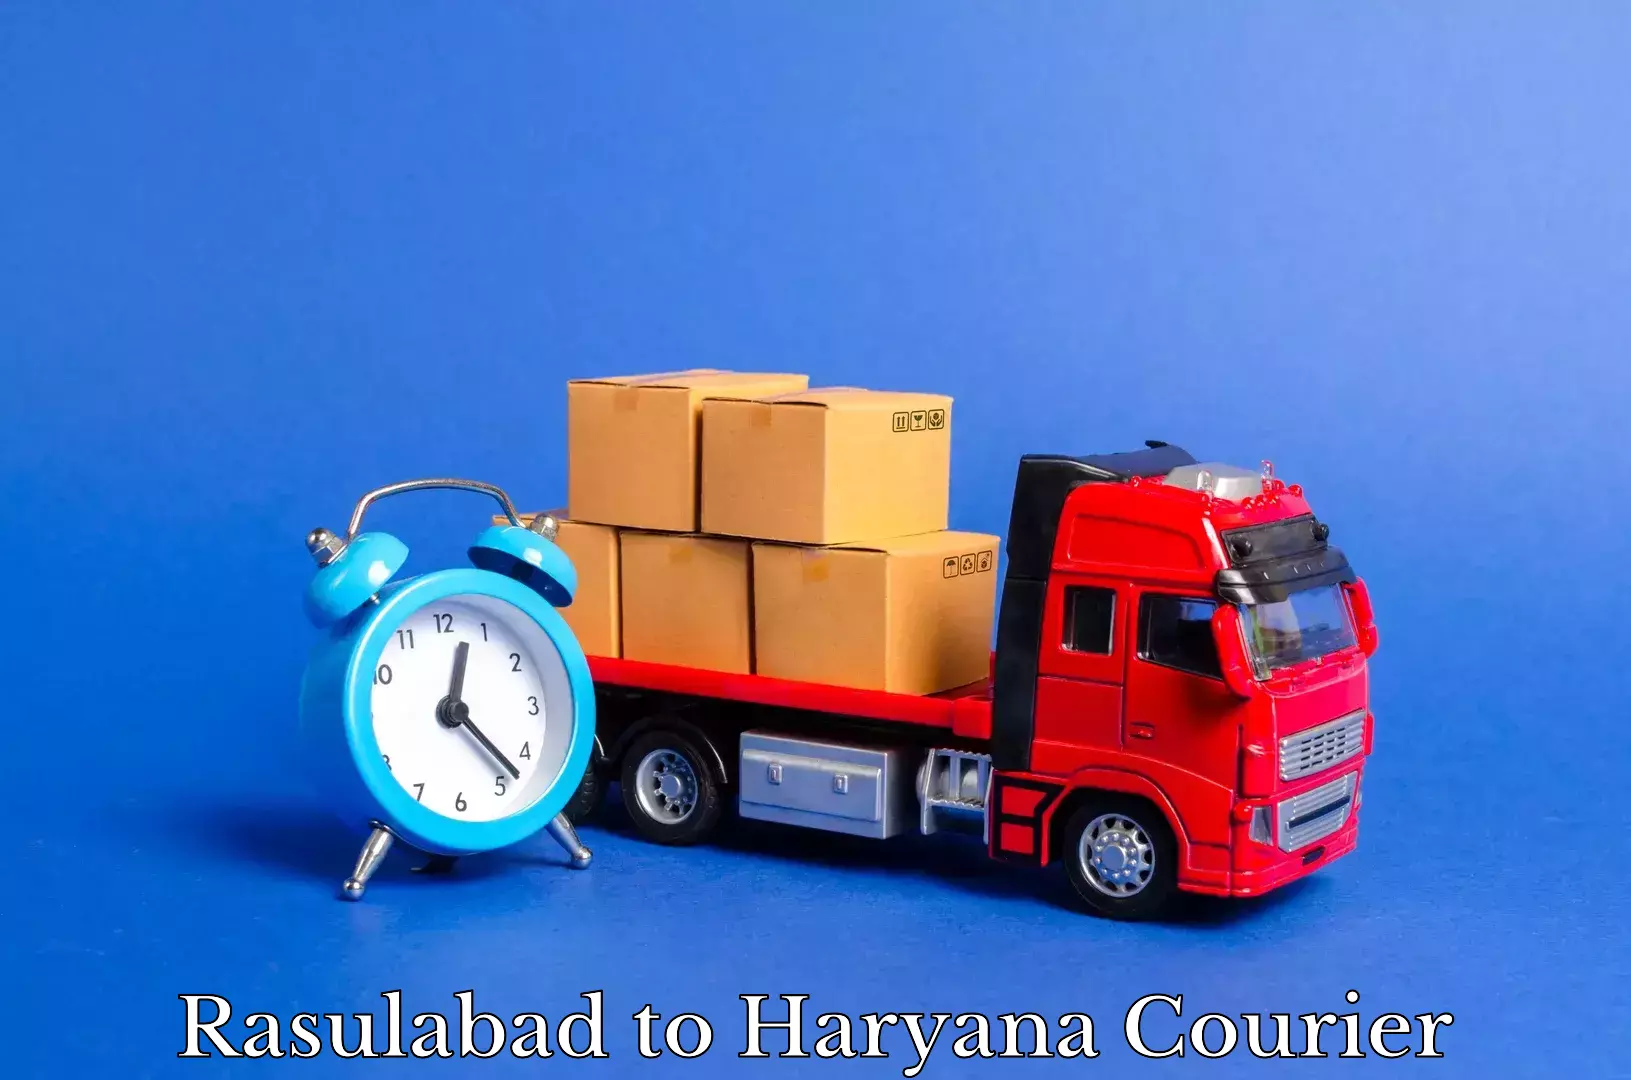 Expert goods movers in Rasulabad to Gurgaon